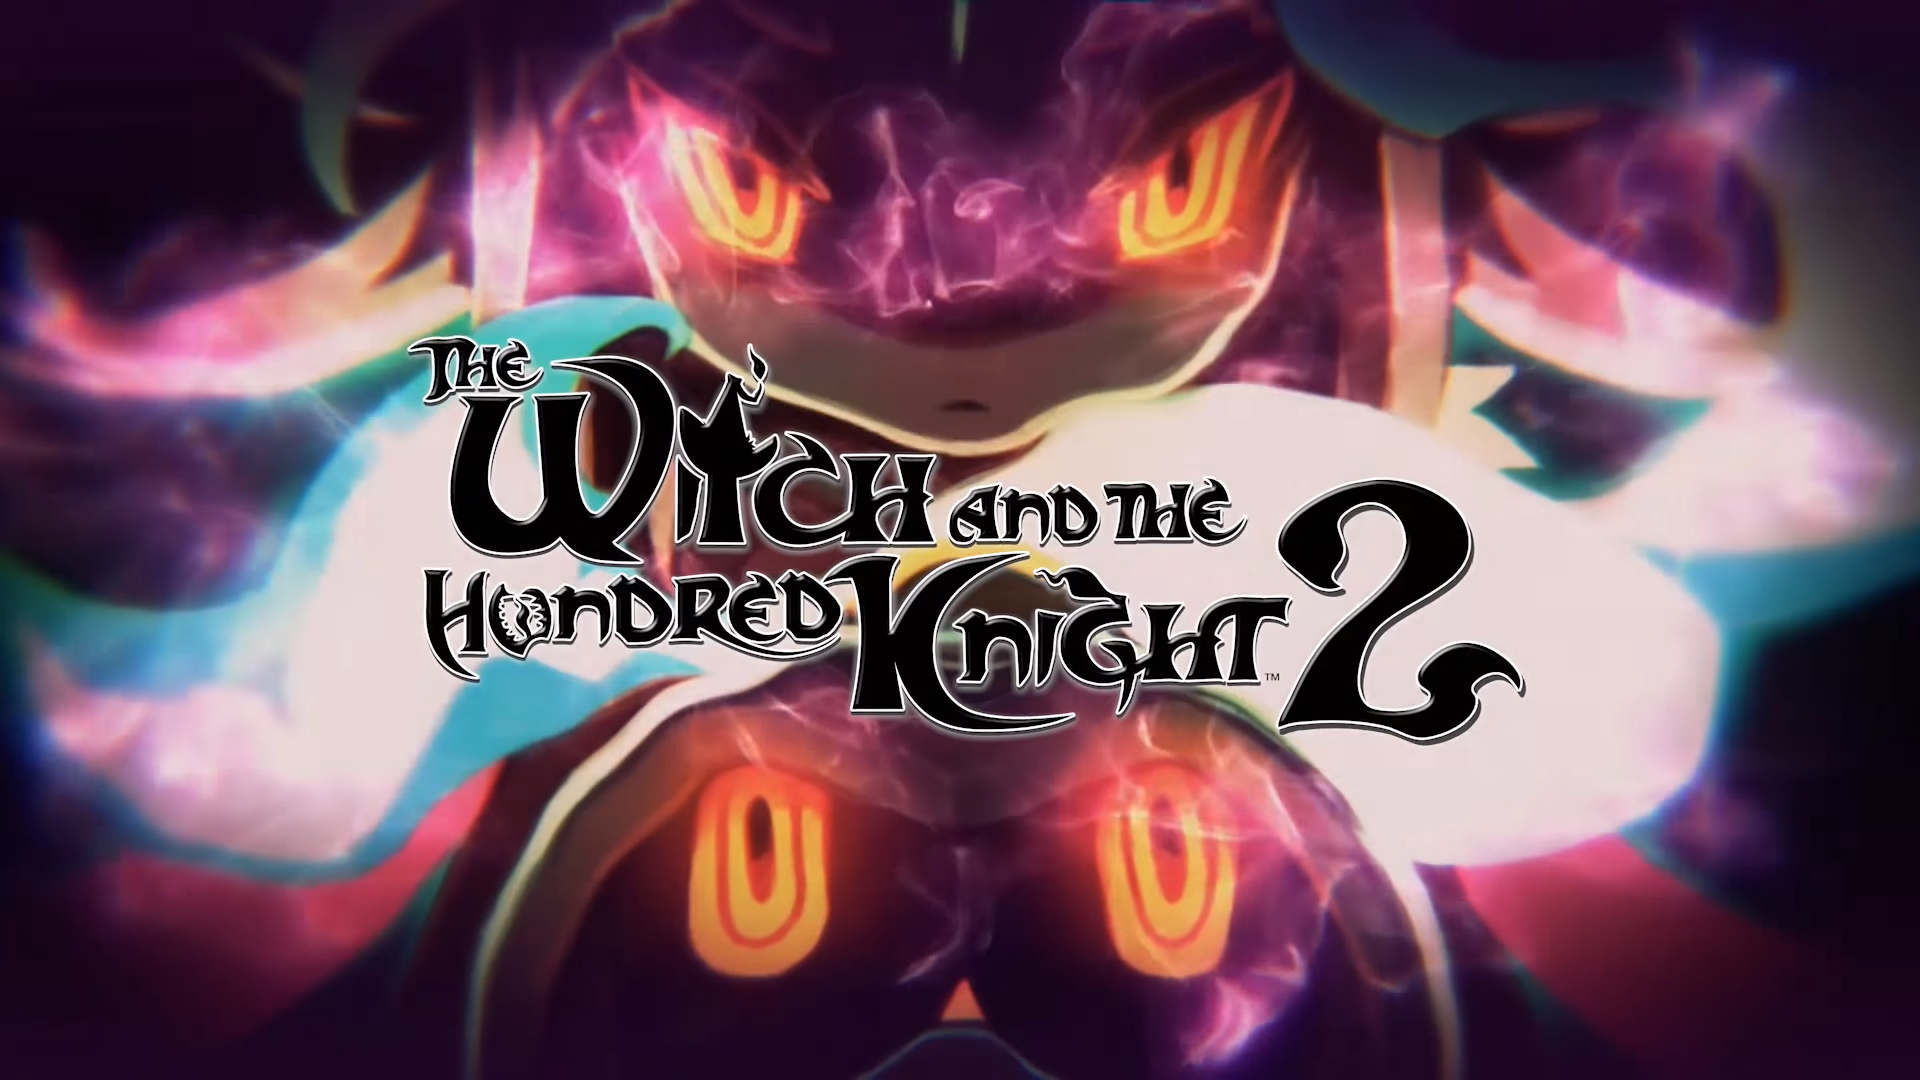 Análisis de The Witch and the Hundred Knight 2